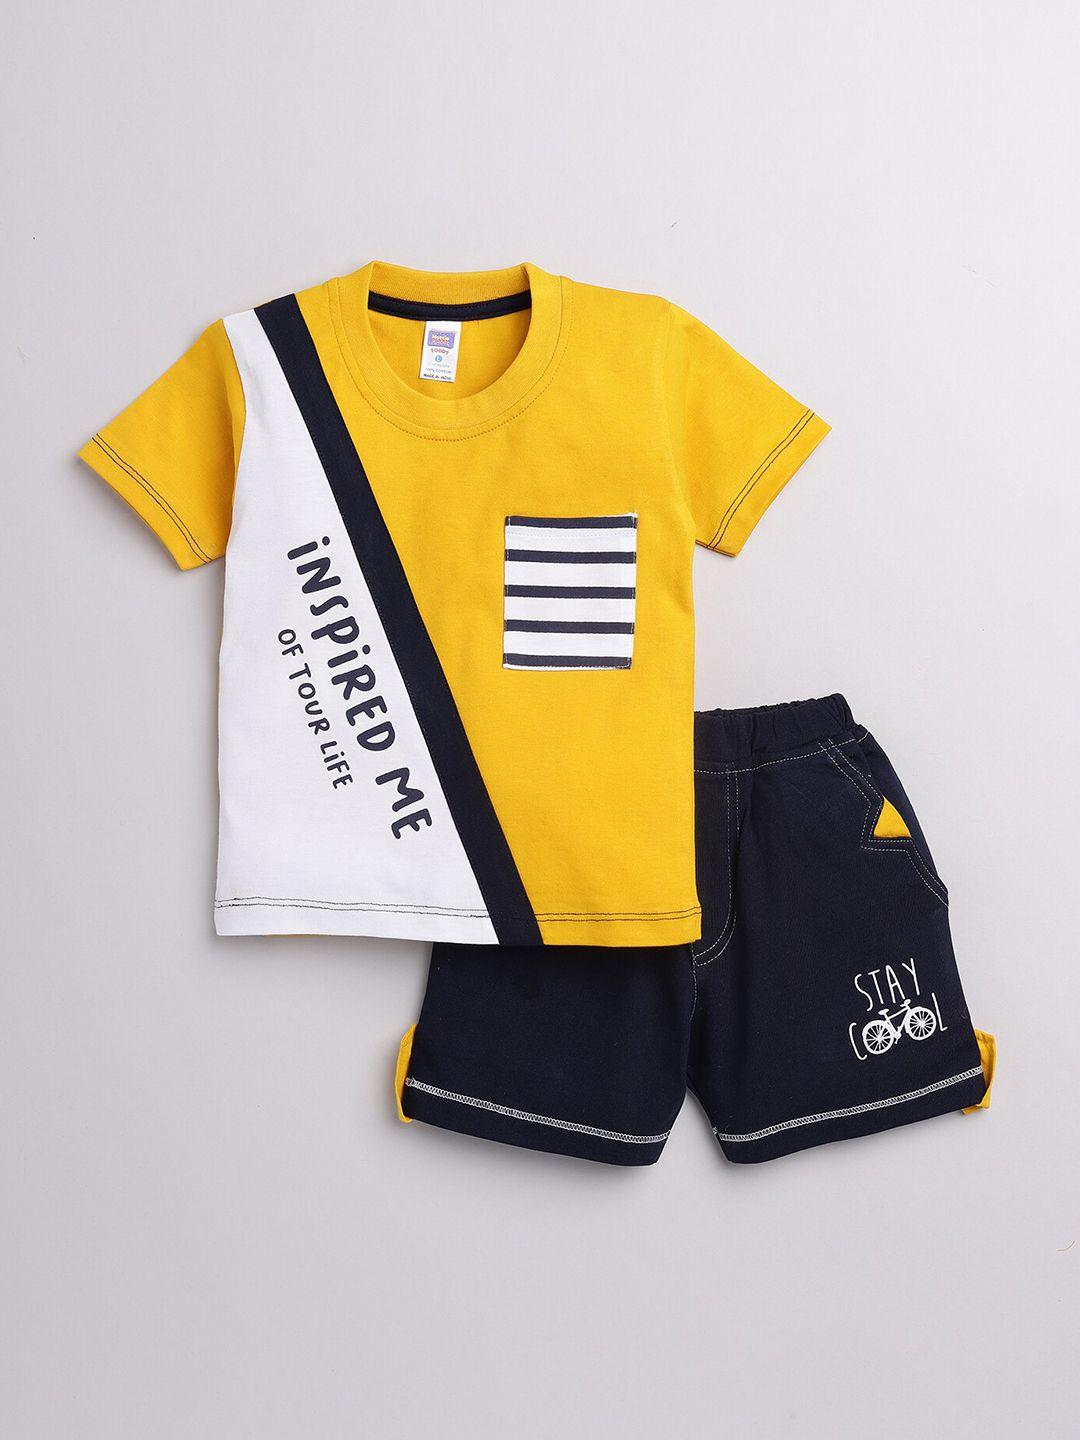 nottie planet boys yellow & navy blue pure cotton t-shirt with shorts